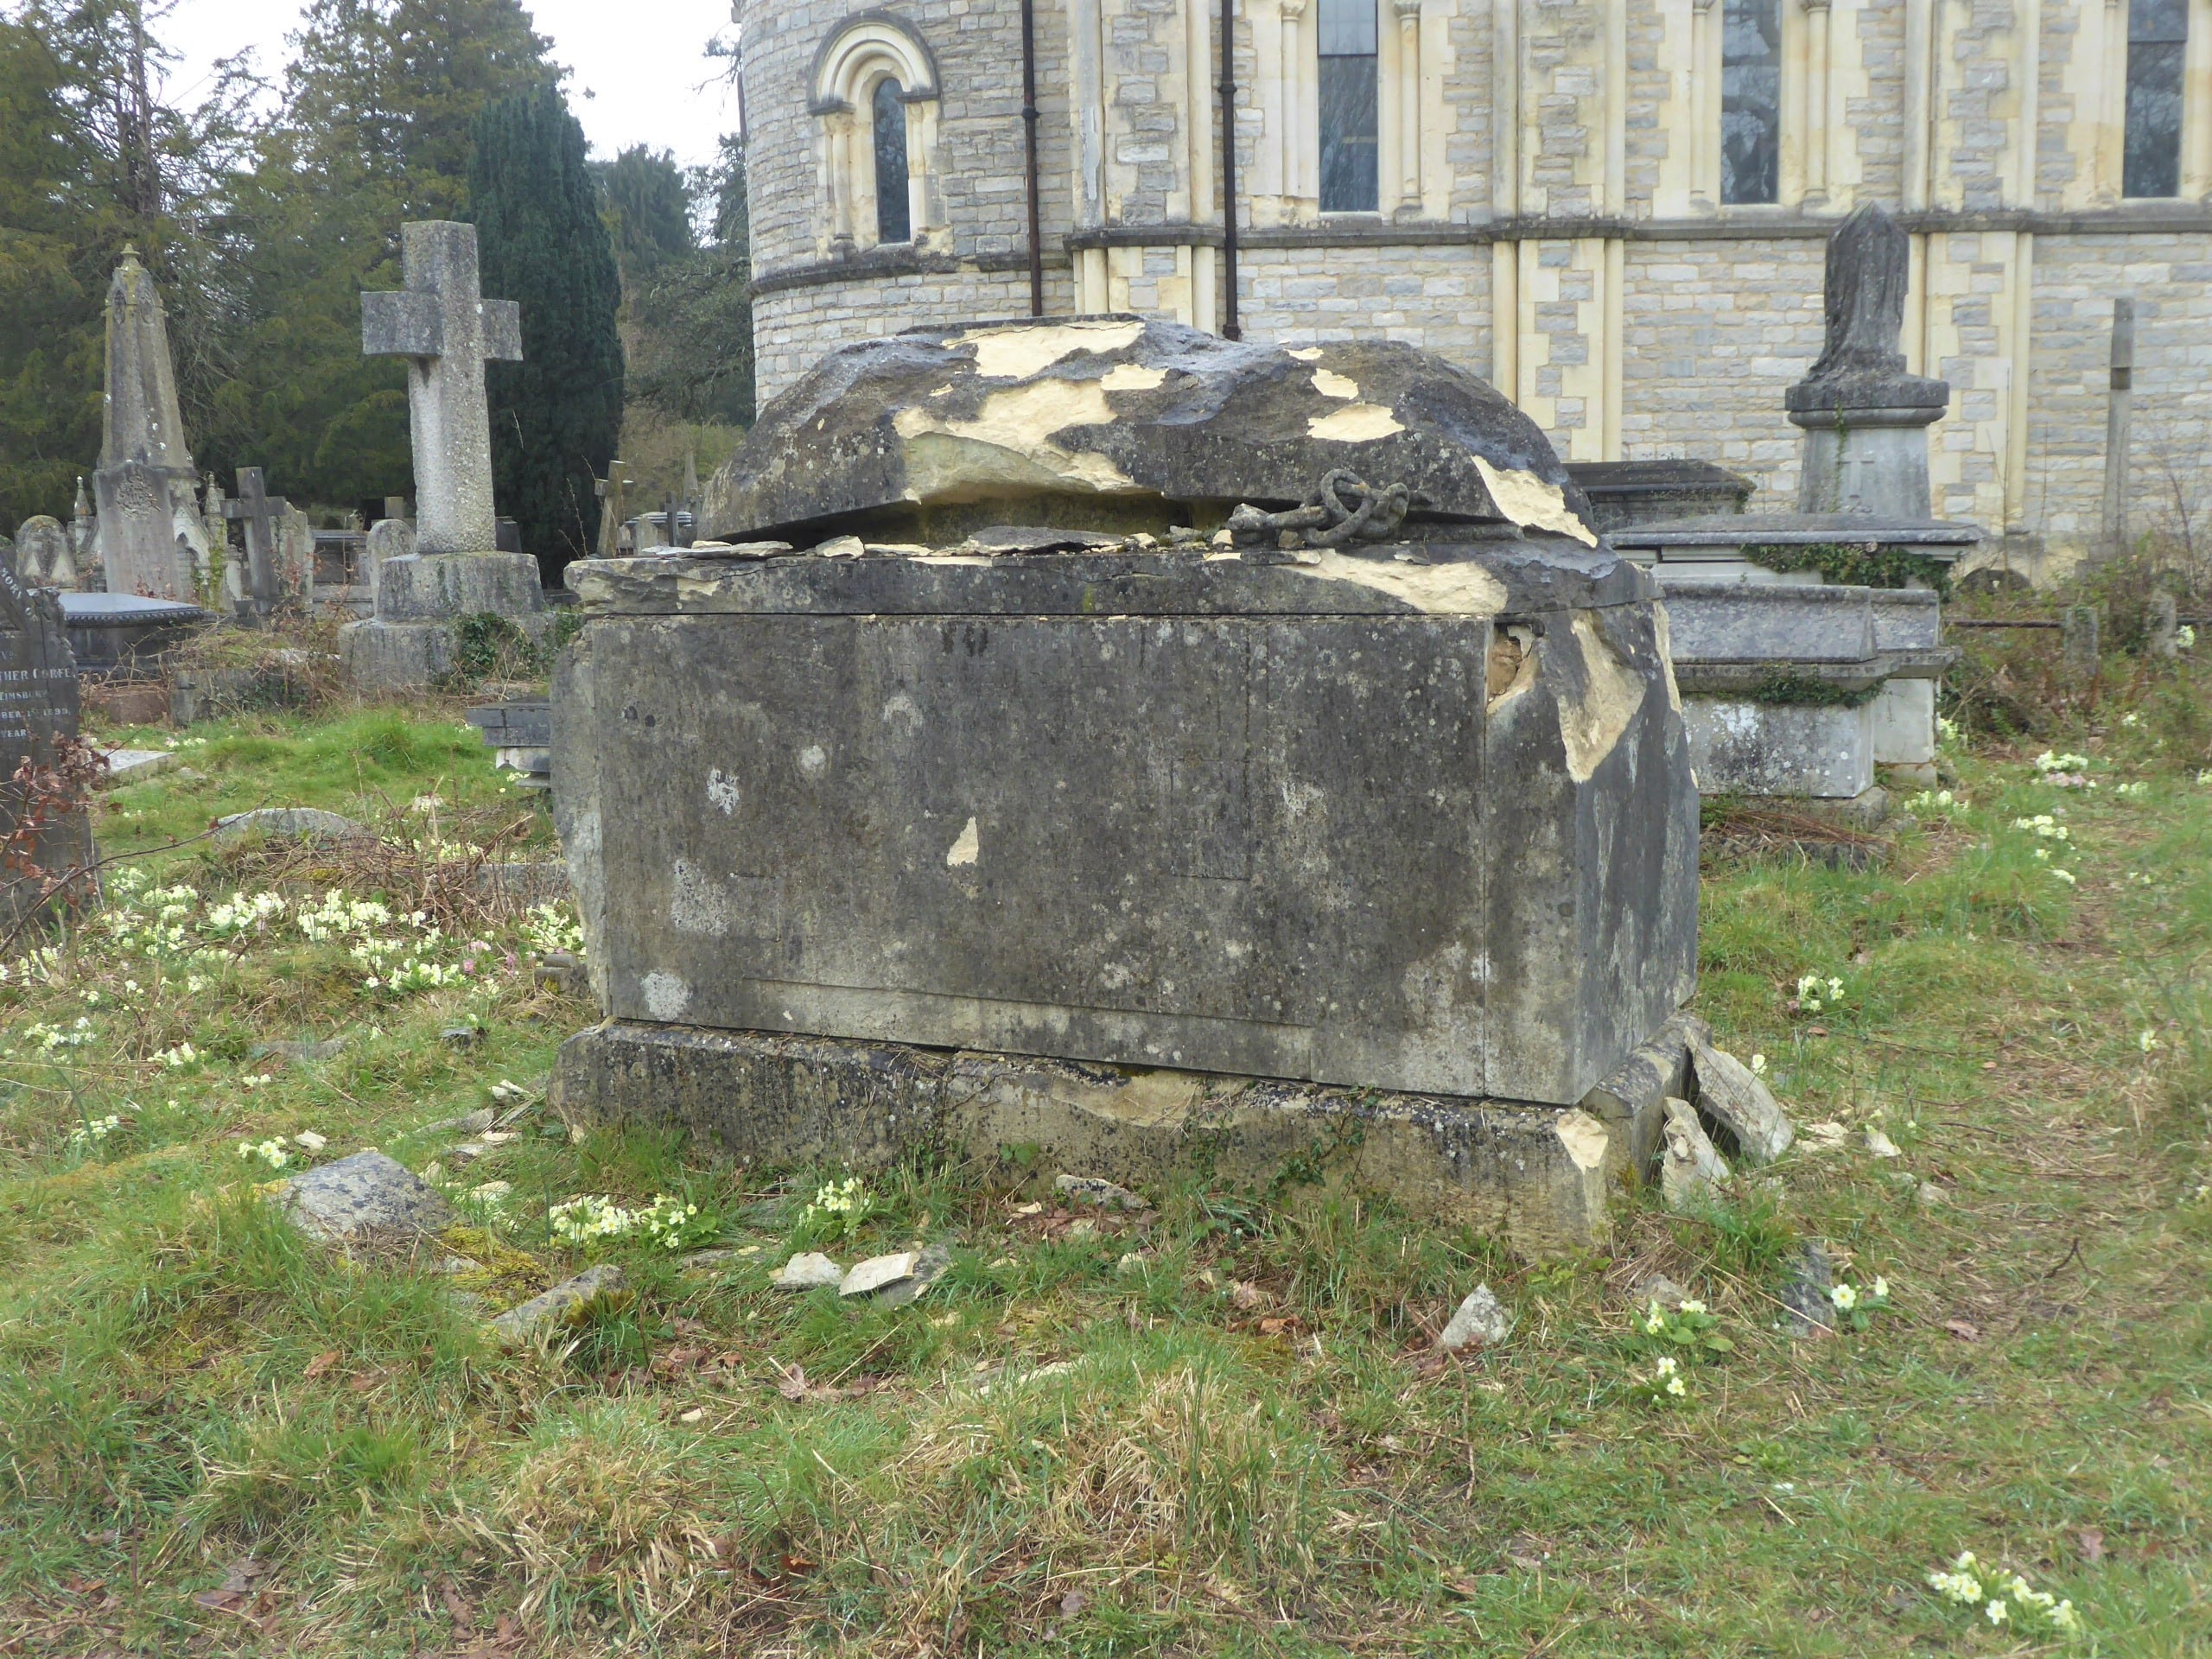 An upside down boat grave for Captain George Smith R.N. in Southampton cemetery.